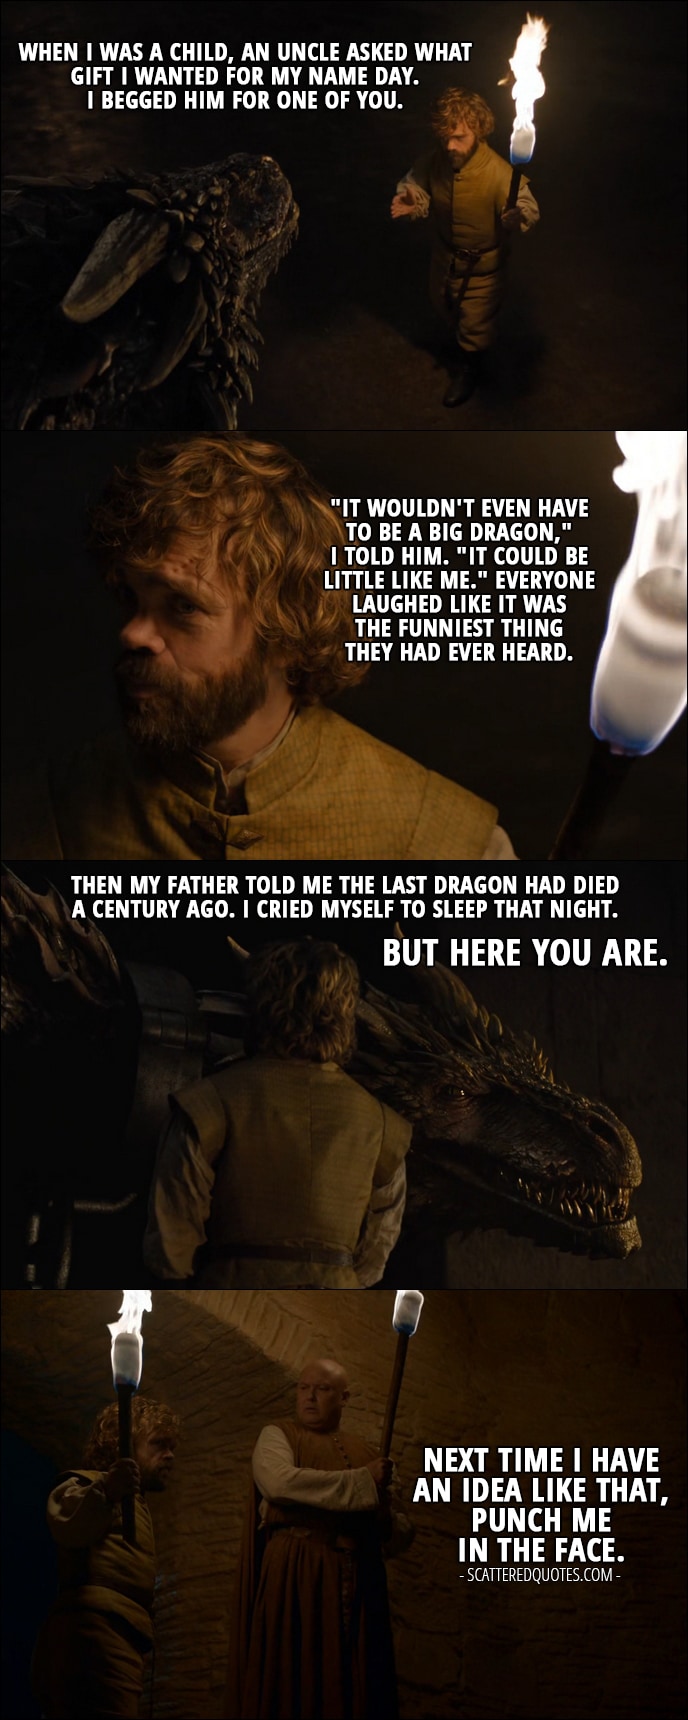 Quote from Game of Thrones 6x02 - Tyrion Lannister: When I was a child, an uncle asked what gift I wanted for my name day. I begged him for one of you. "It wouldn't even have to be a big dragon," I told him. "It could be little like me." Everyone laughed like it was the funniest thing they had ever heard. Then my father told me the last dragon had died a century ago. I cried myself to sleep that night. But here you are. (Tyrion removes the chains from the dragons and is leaving, at the way out he speaks to Varys:) Next time I have an idea like that, punch me in the face.